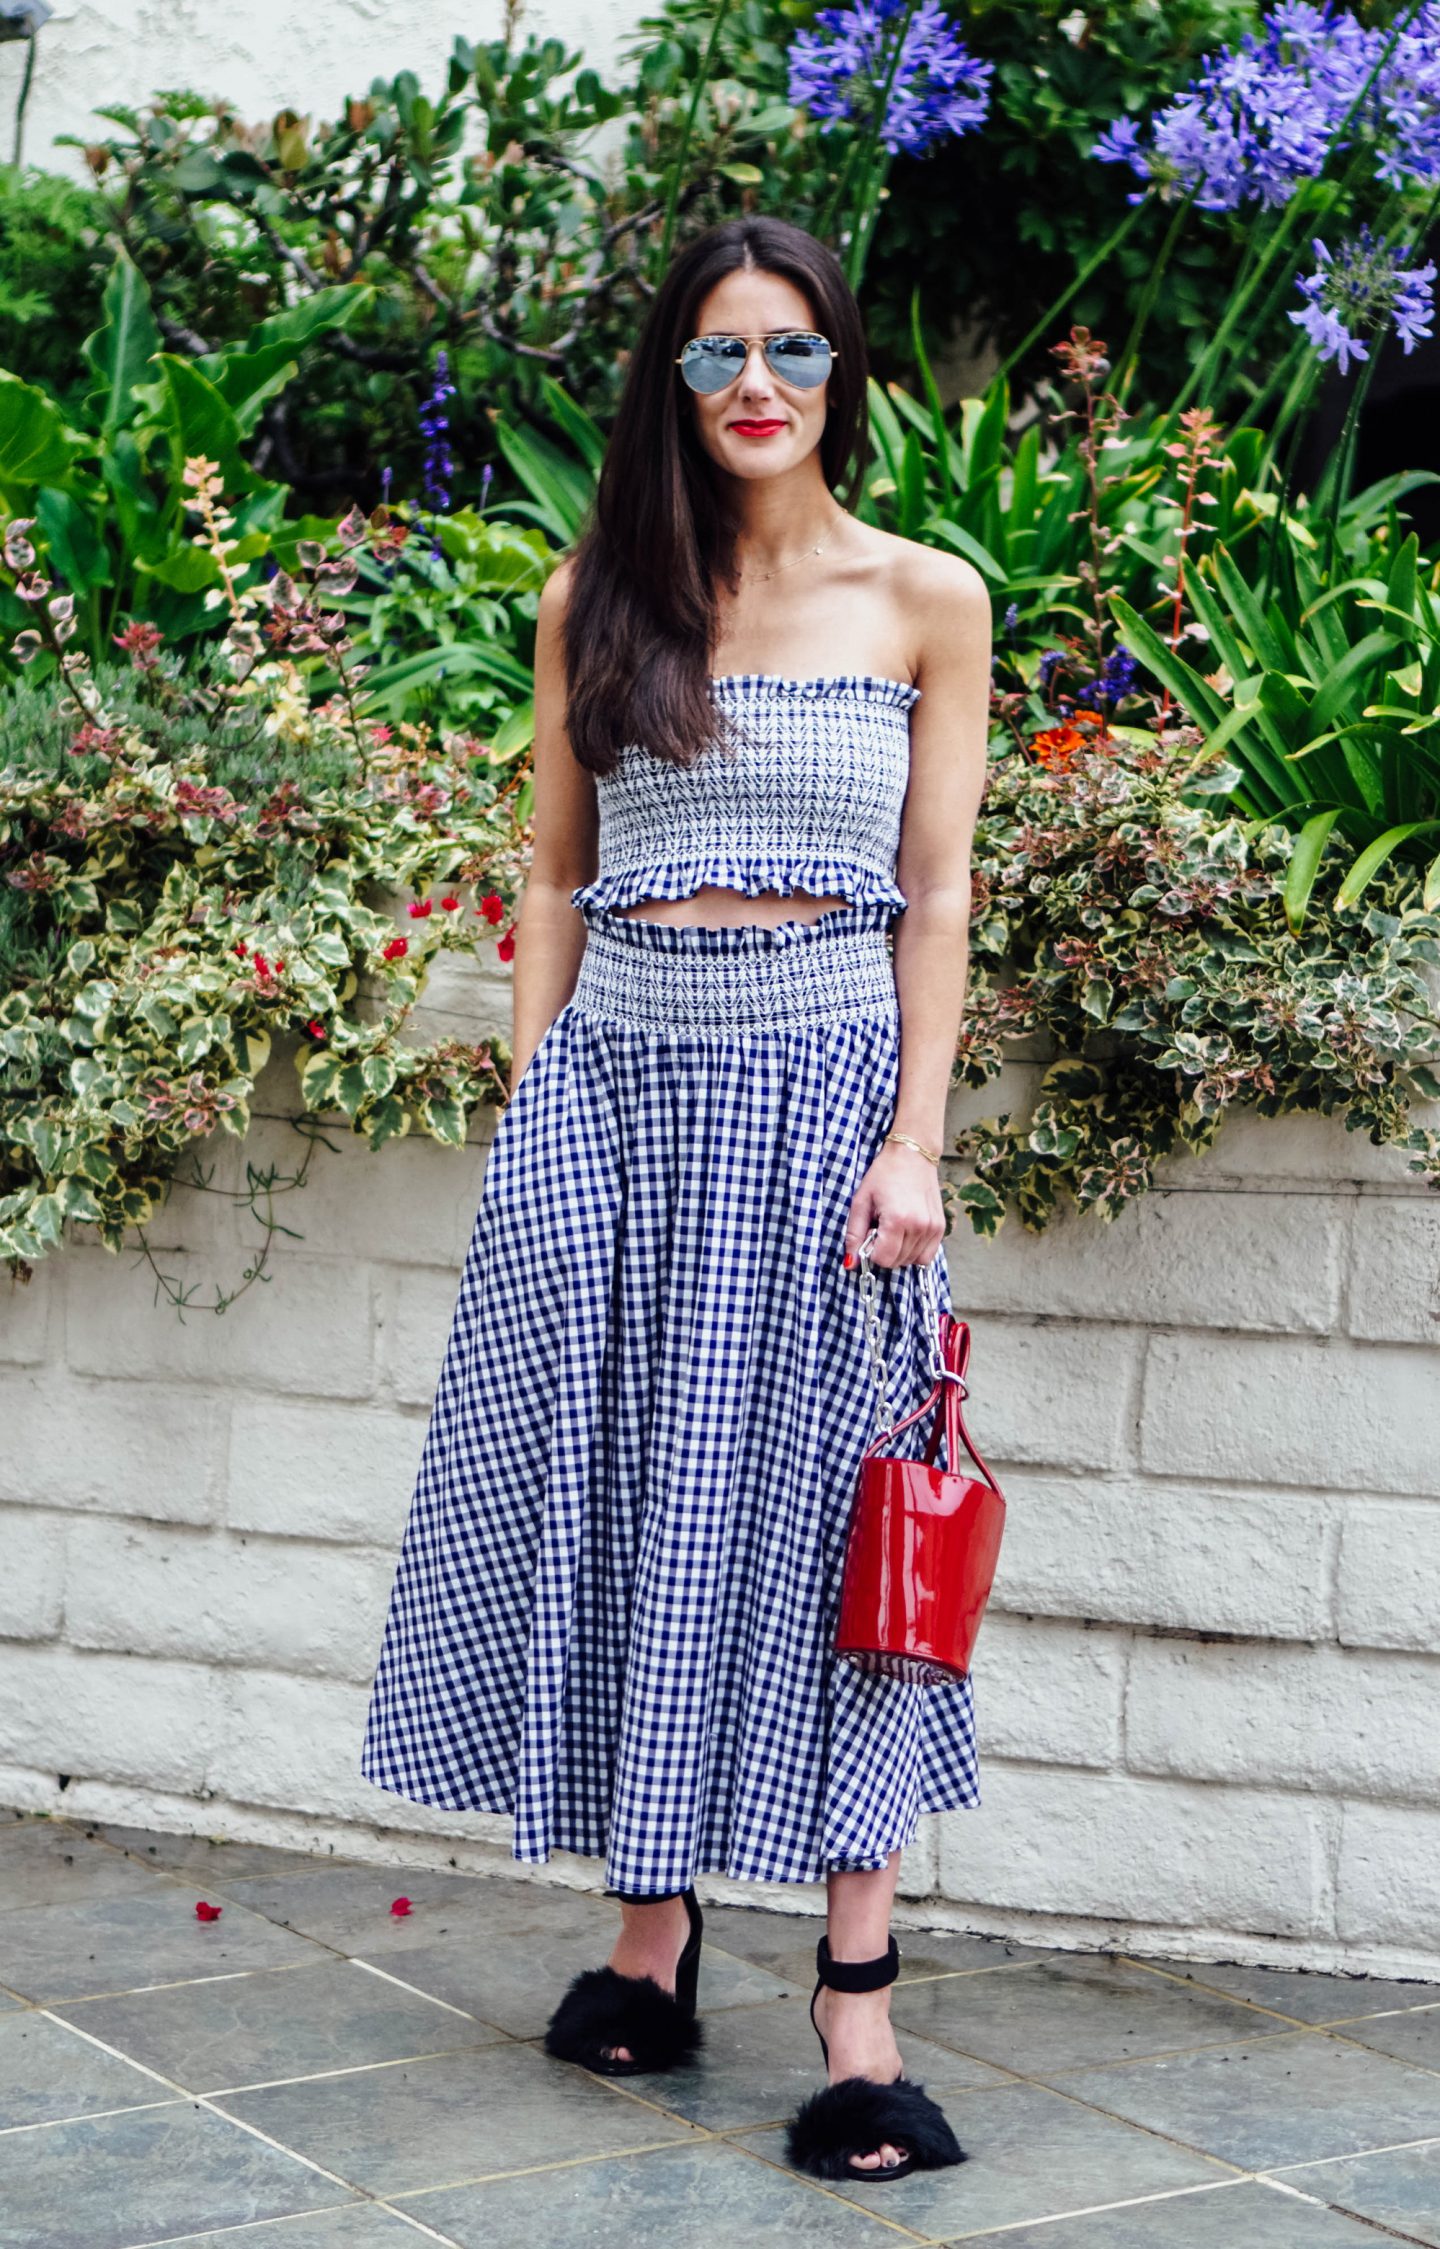 I'm over on thedandyliar.com showing you how gingham can be worn four different ways, and that gingham is no longer just for button-down shirts! I'm also rounding up my favorite gingham pieces in an easy-to-shop list.